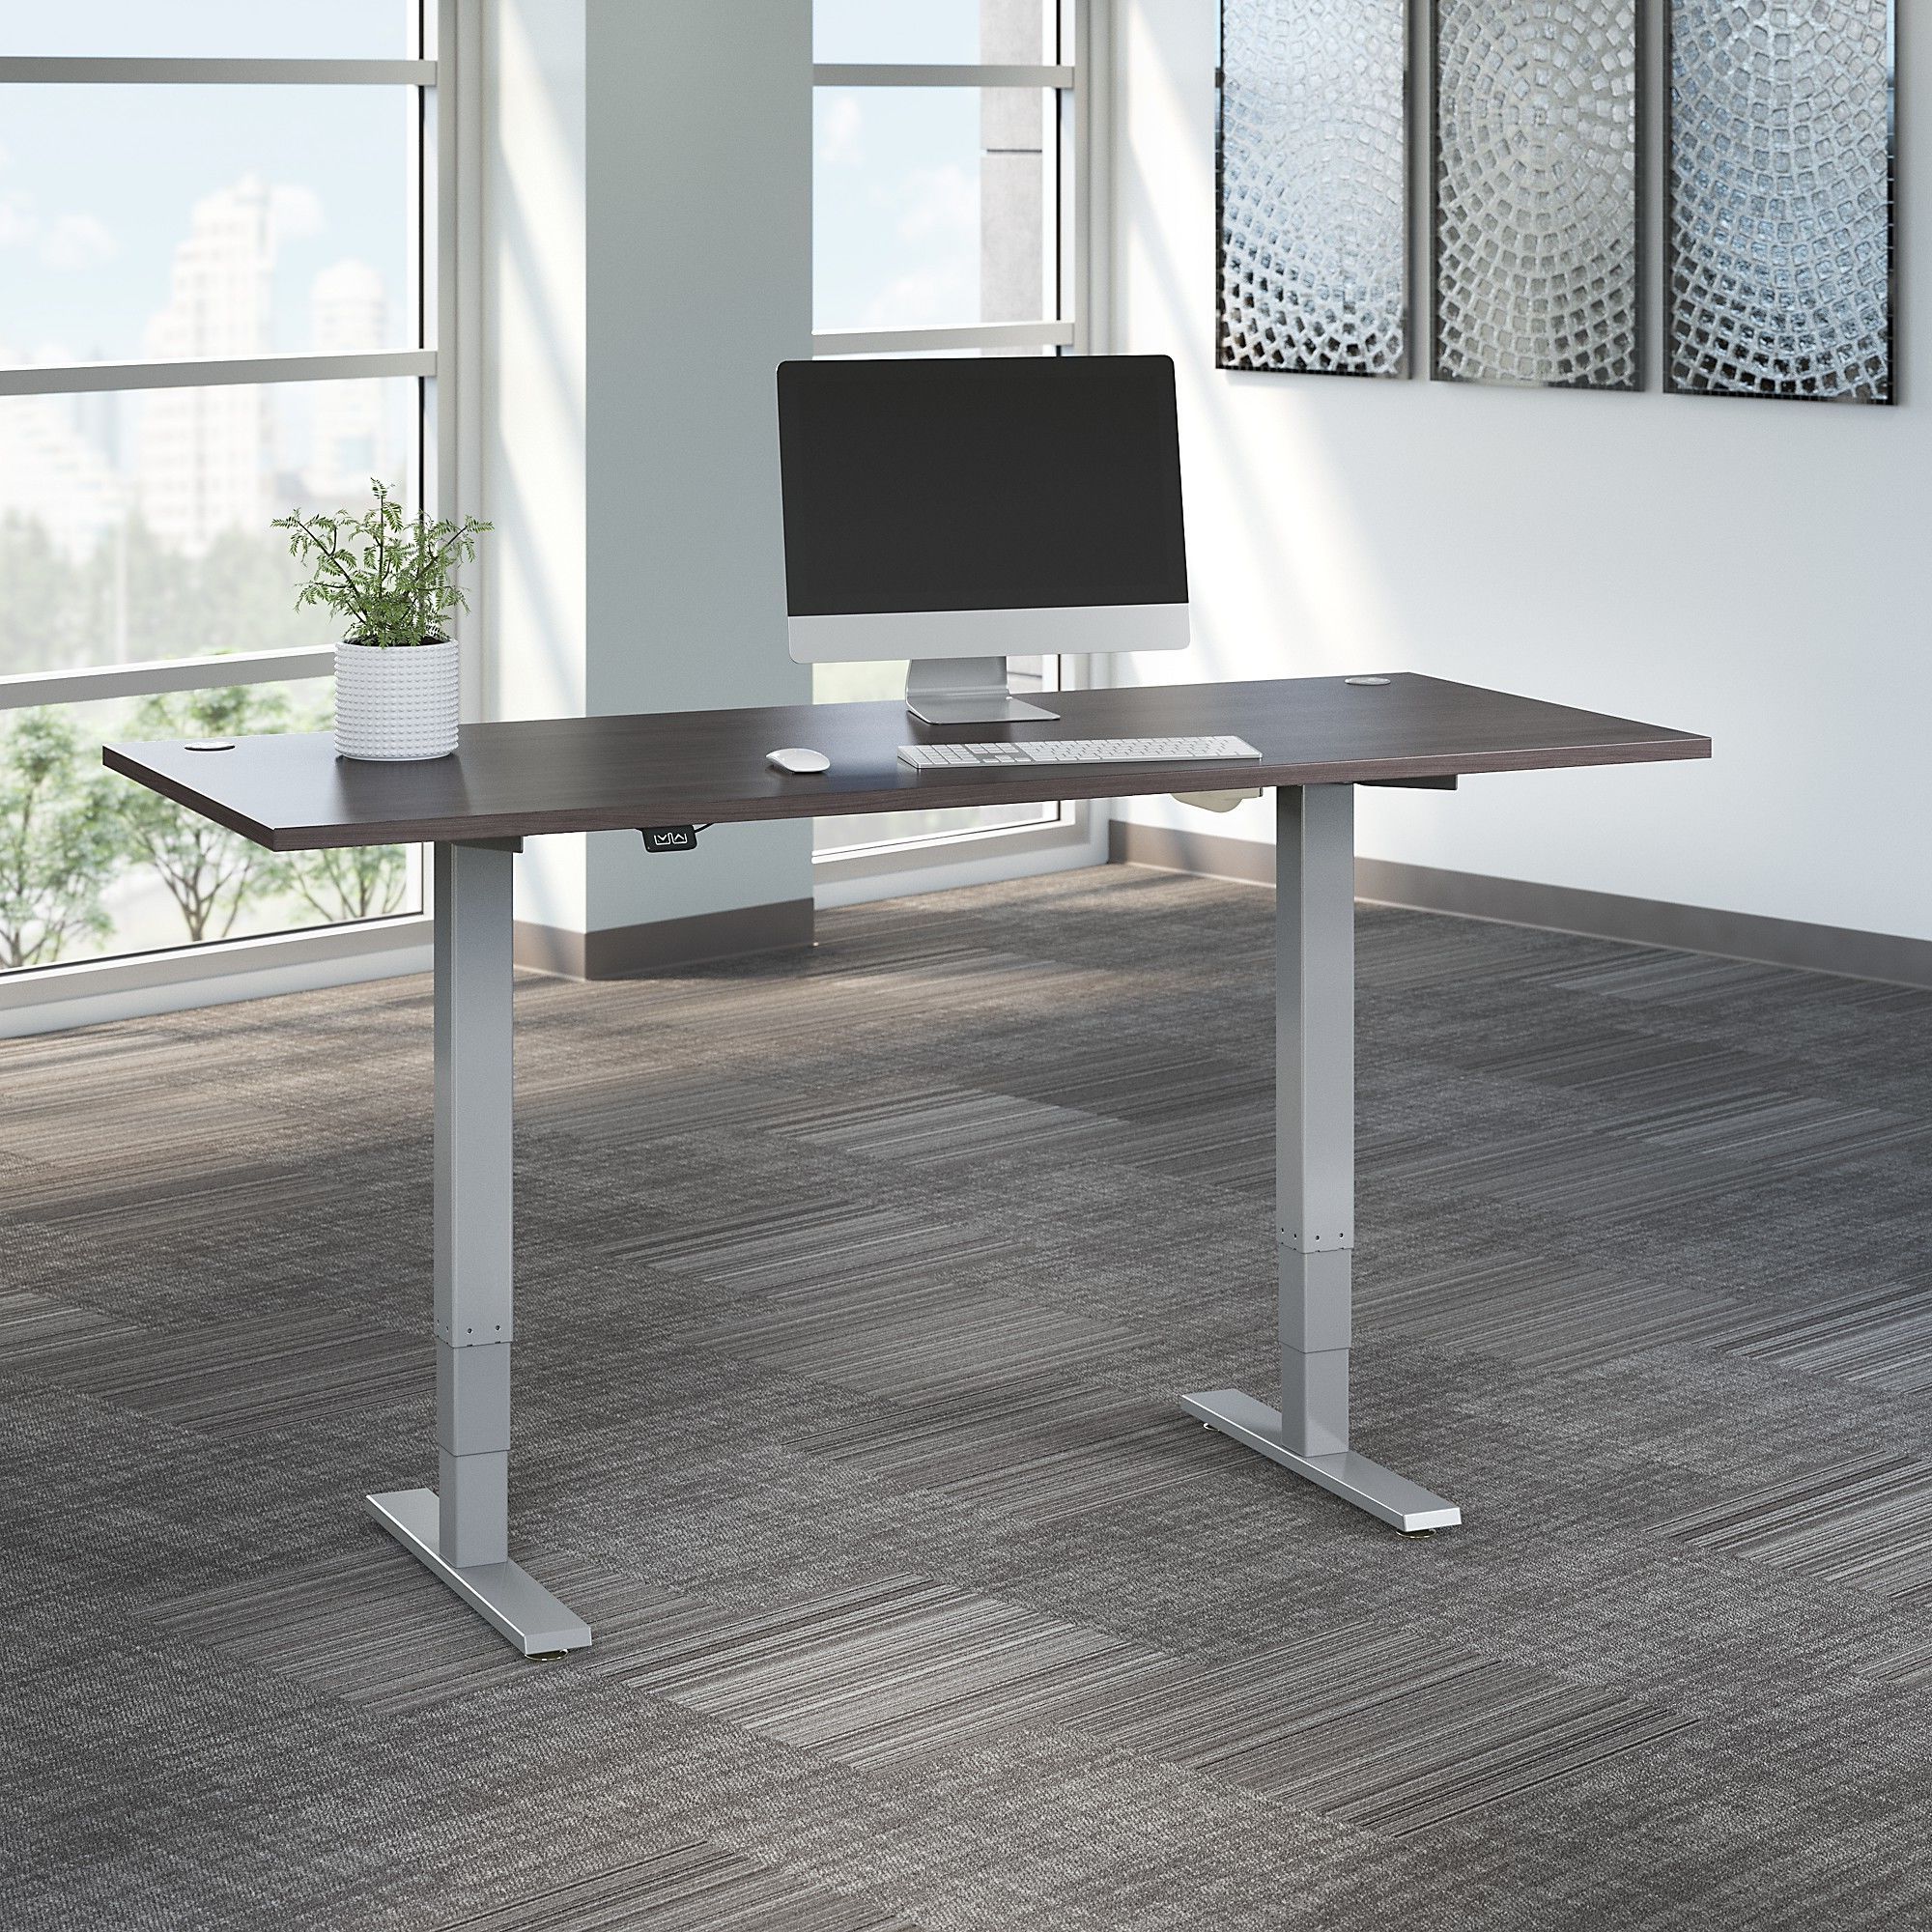 Most Popular 72w X 30d Electric Height Adjustable Standing Desk In Storm Gray In Adjustable Electric Lift Desks (View 4 of 15)